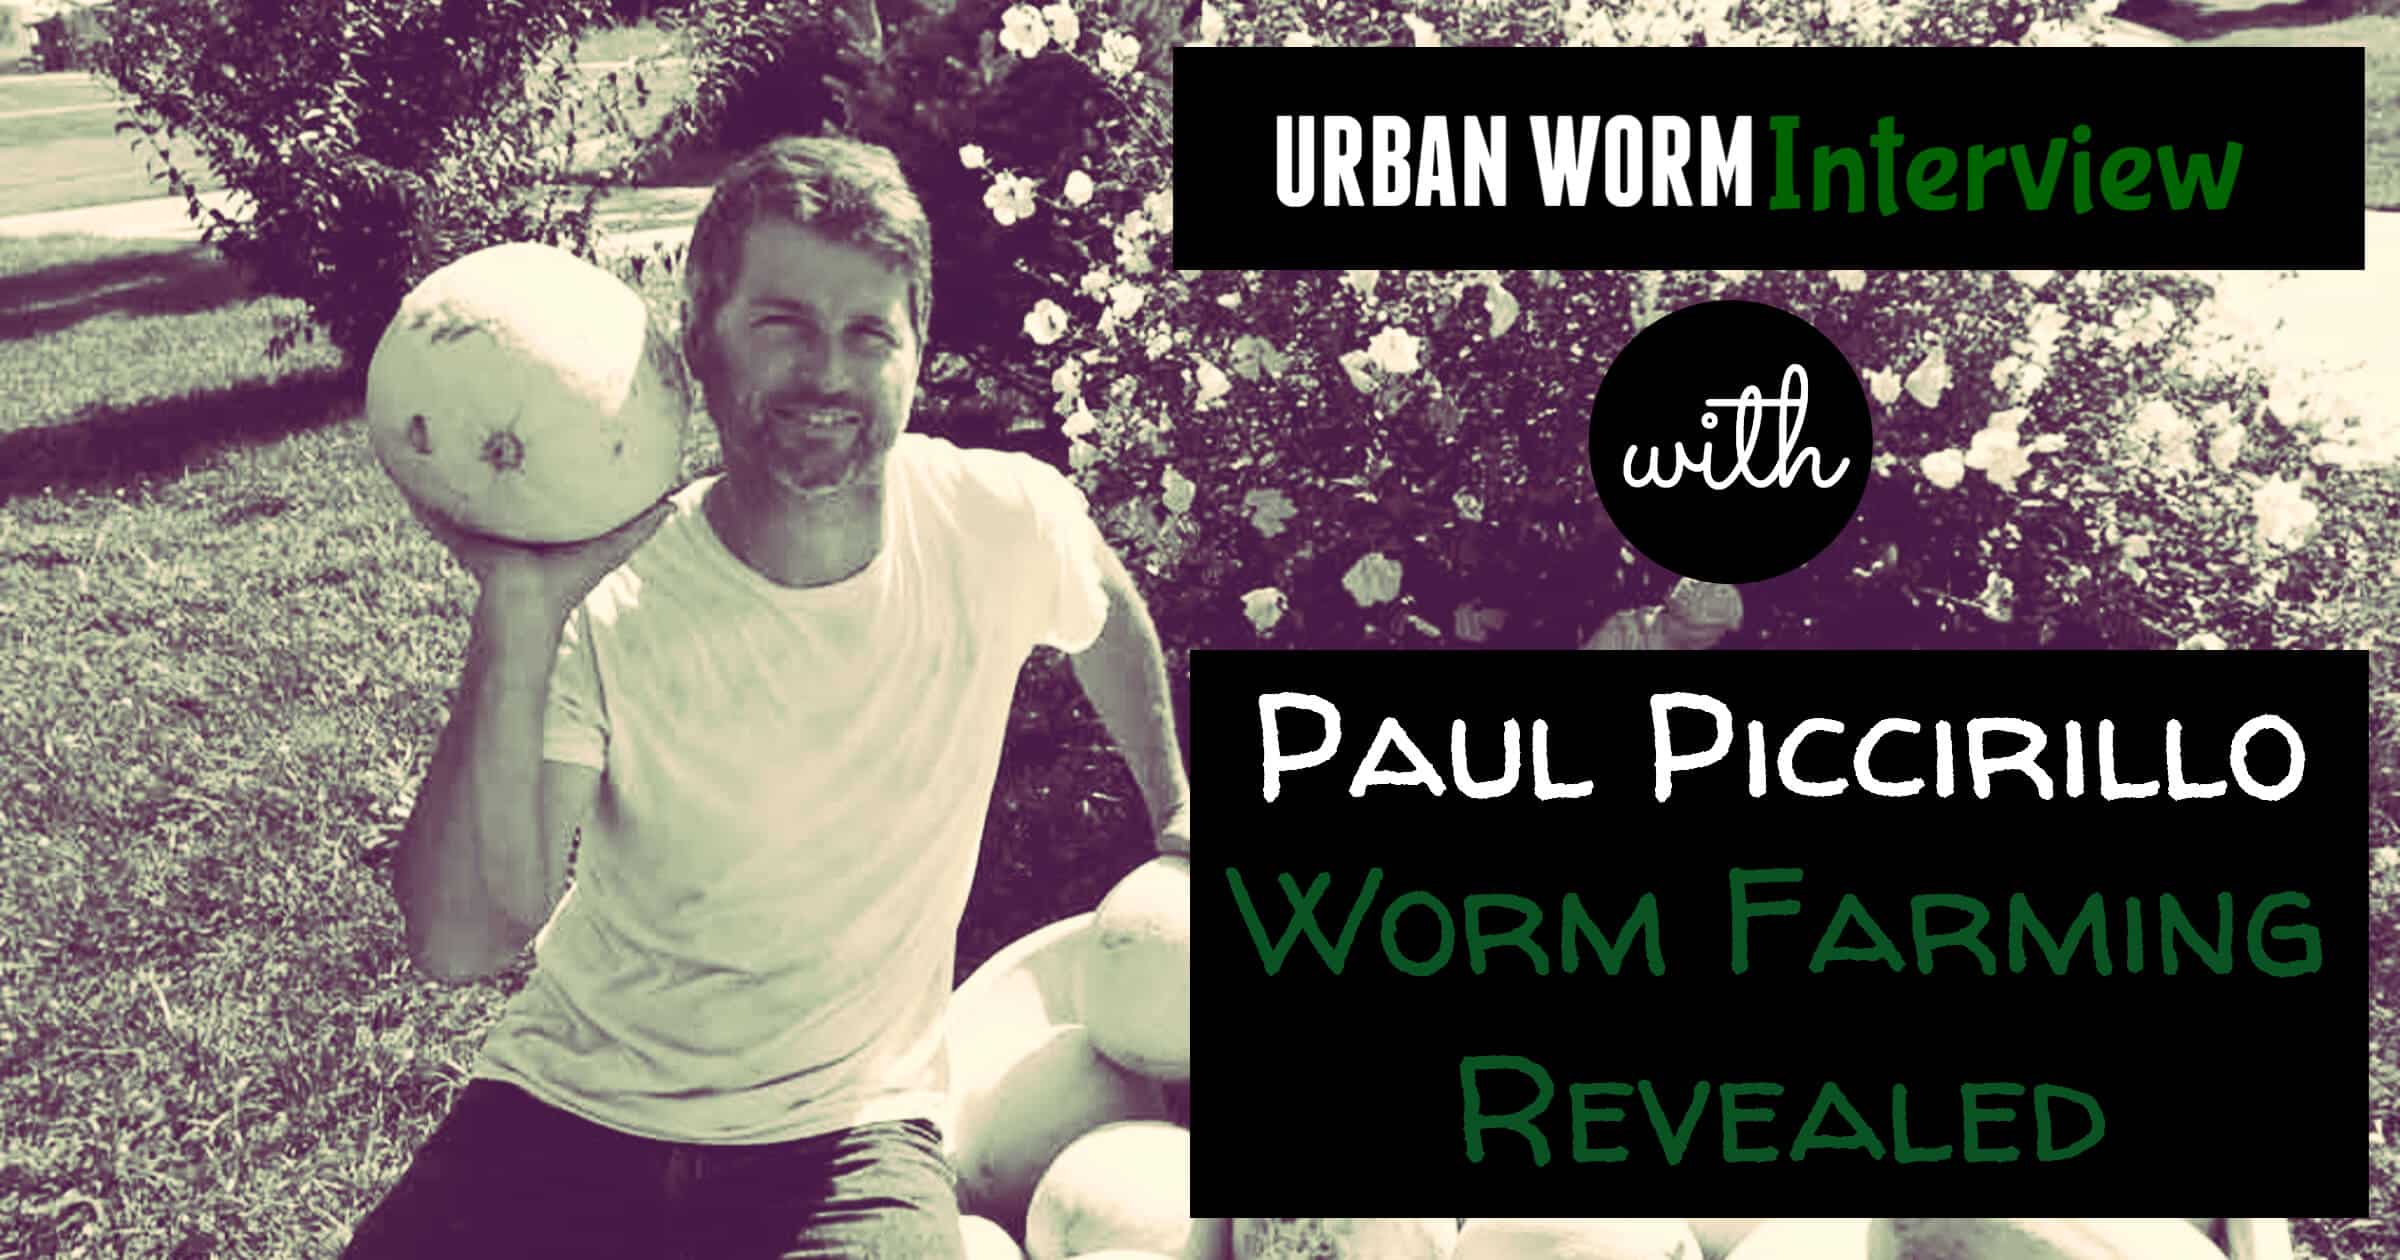 Urban Worm Interview Series: Paul Piccirillo of Worm Farming Revealed